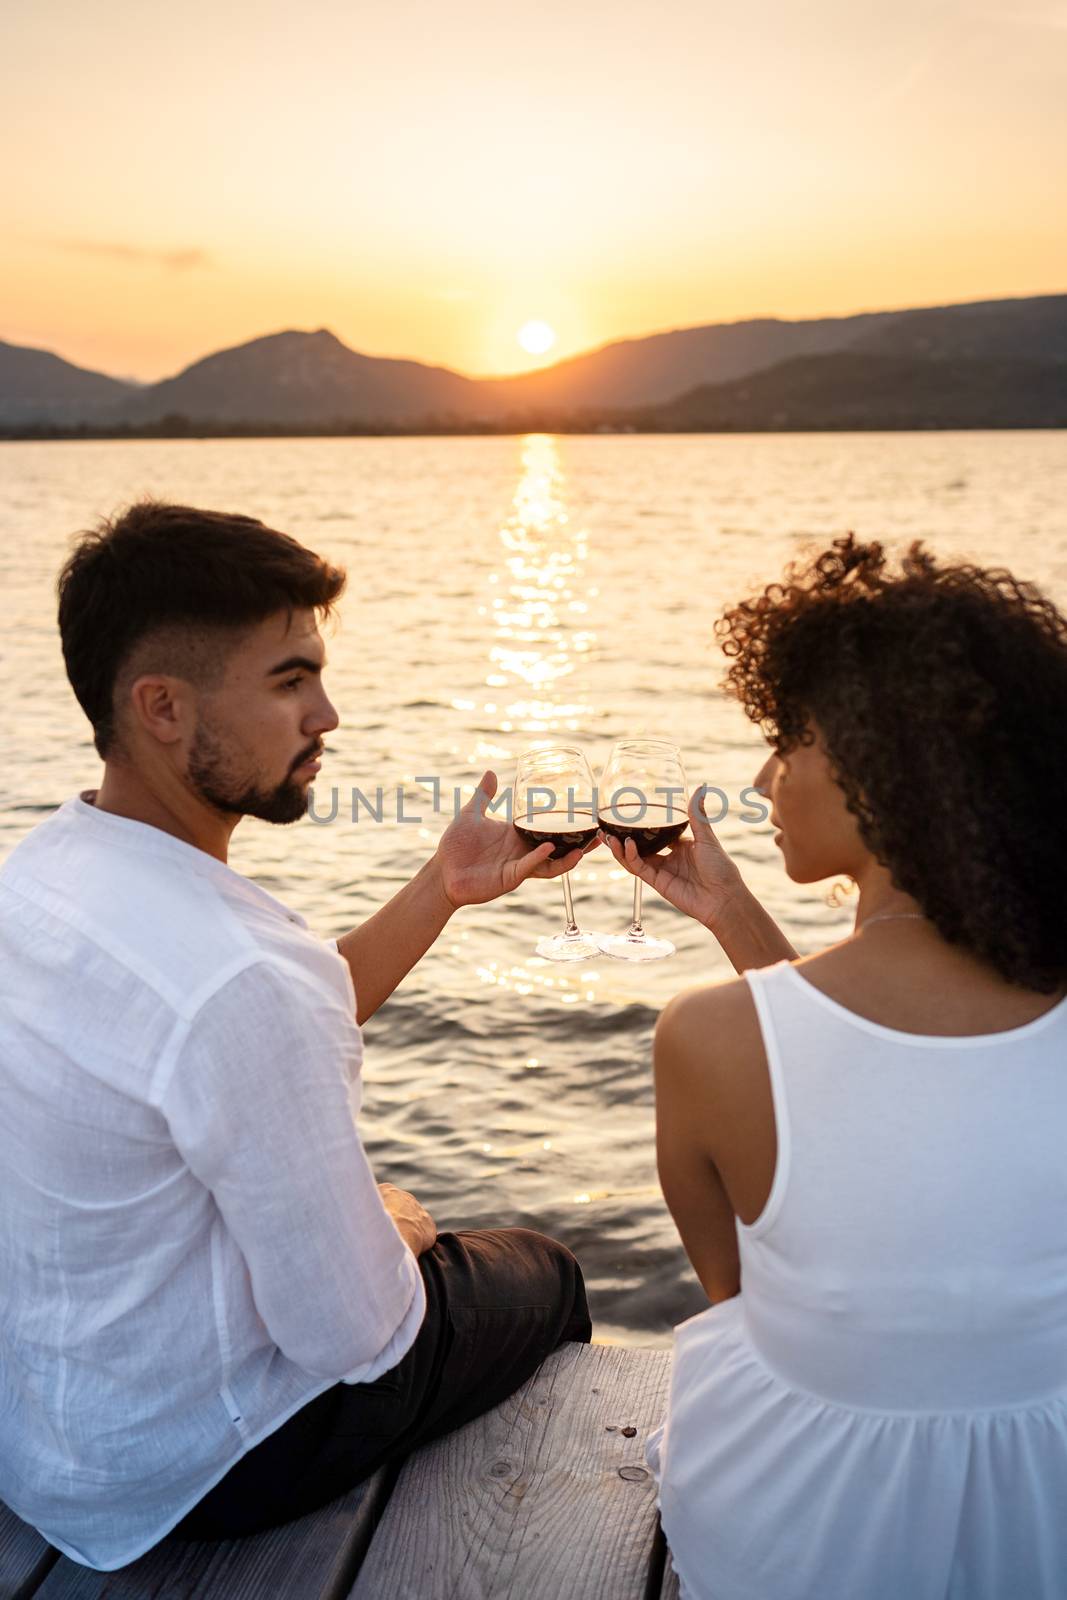 Romance scene of multiracial couple sitting on a pier at sunset or dawn toasting with red wine looking each other in the eyes - Attractive man bonding with her Hispanic girlfriend - Focus on glasses